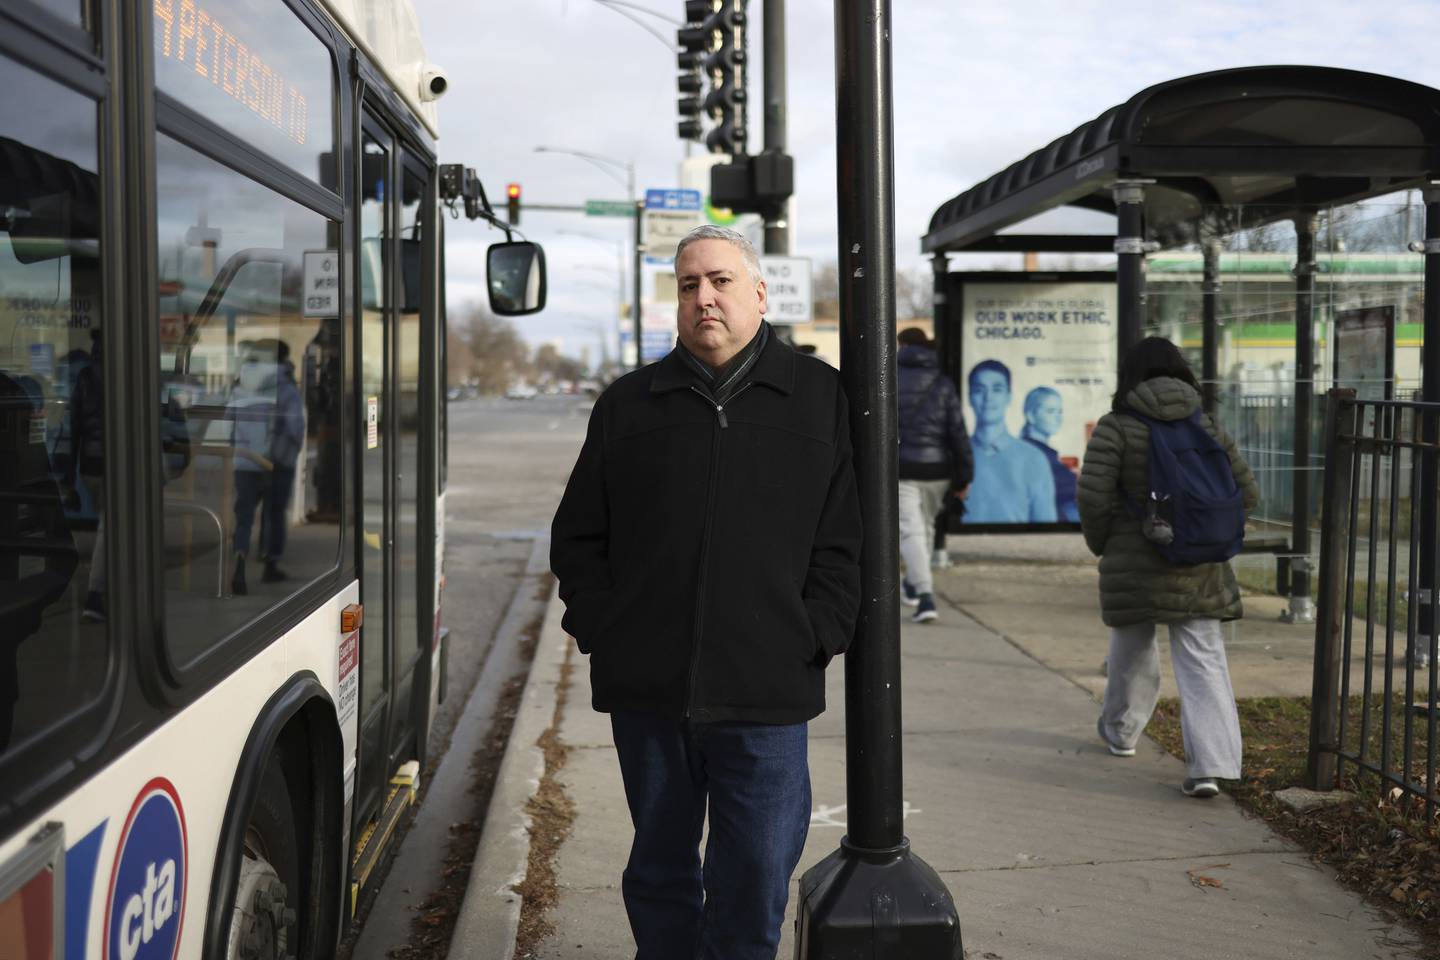 Michael Doyle, of Chicago, at a bus stop across the street from his workplace in the 2800 block of West Peterson Avenue on Dec. 8, 2022, in Chicago. Doyle has decided to use ride-share services for now instead of using the CTA because of negative experiences, including having buses pass the stop while he waits.  